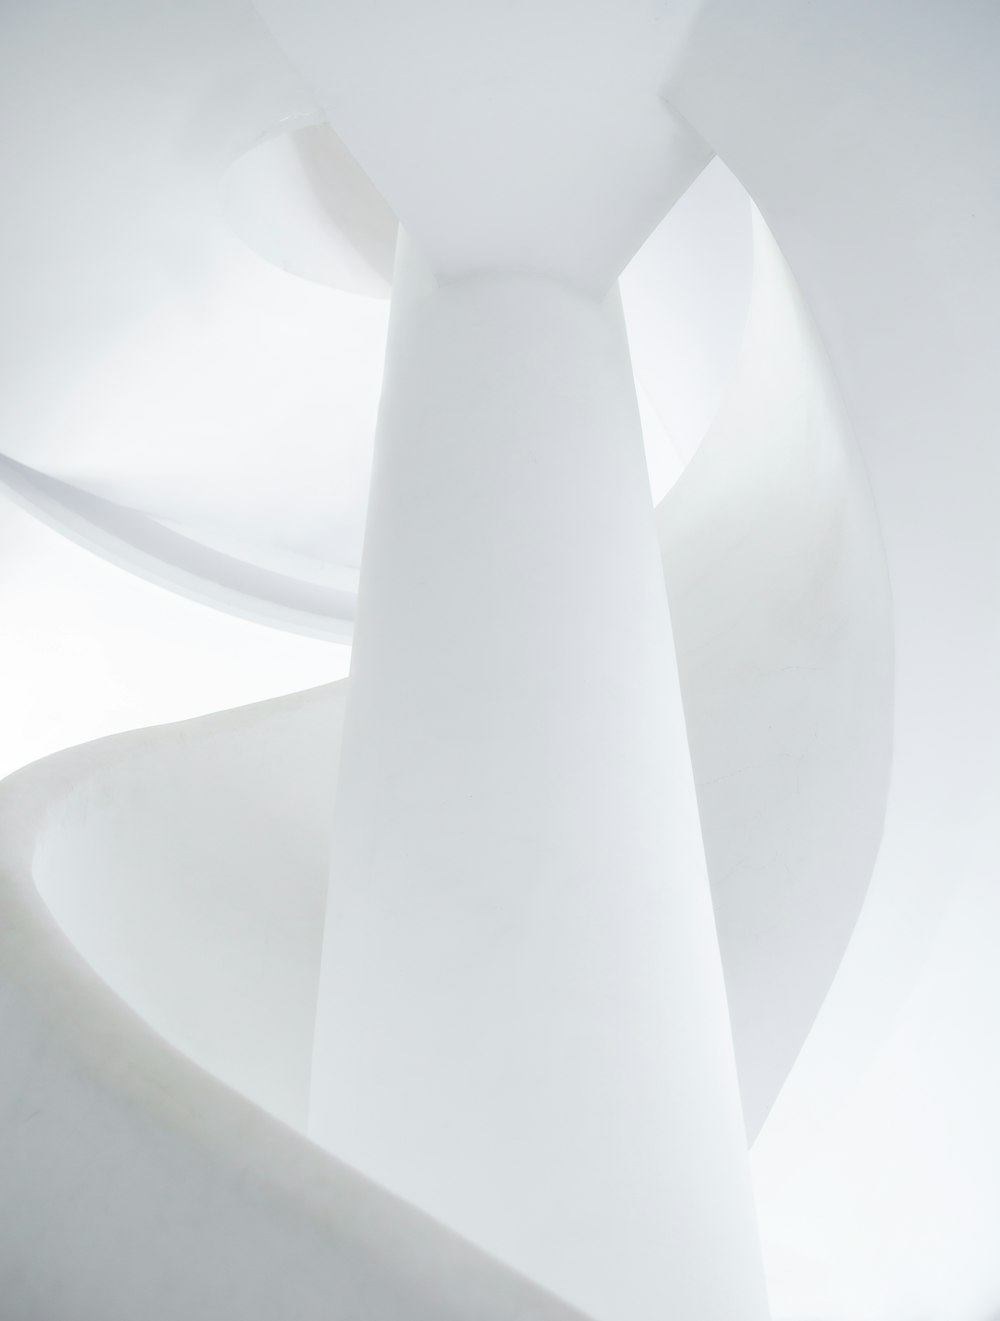 a white sculpture with a spiral design on it